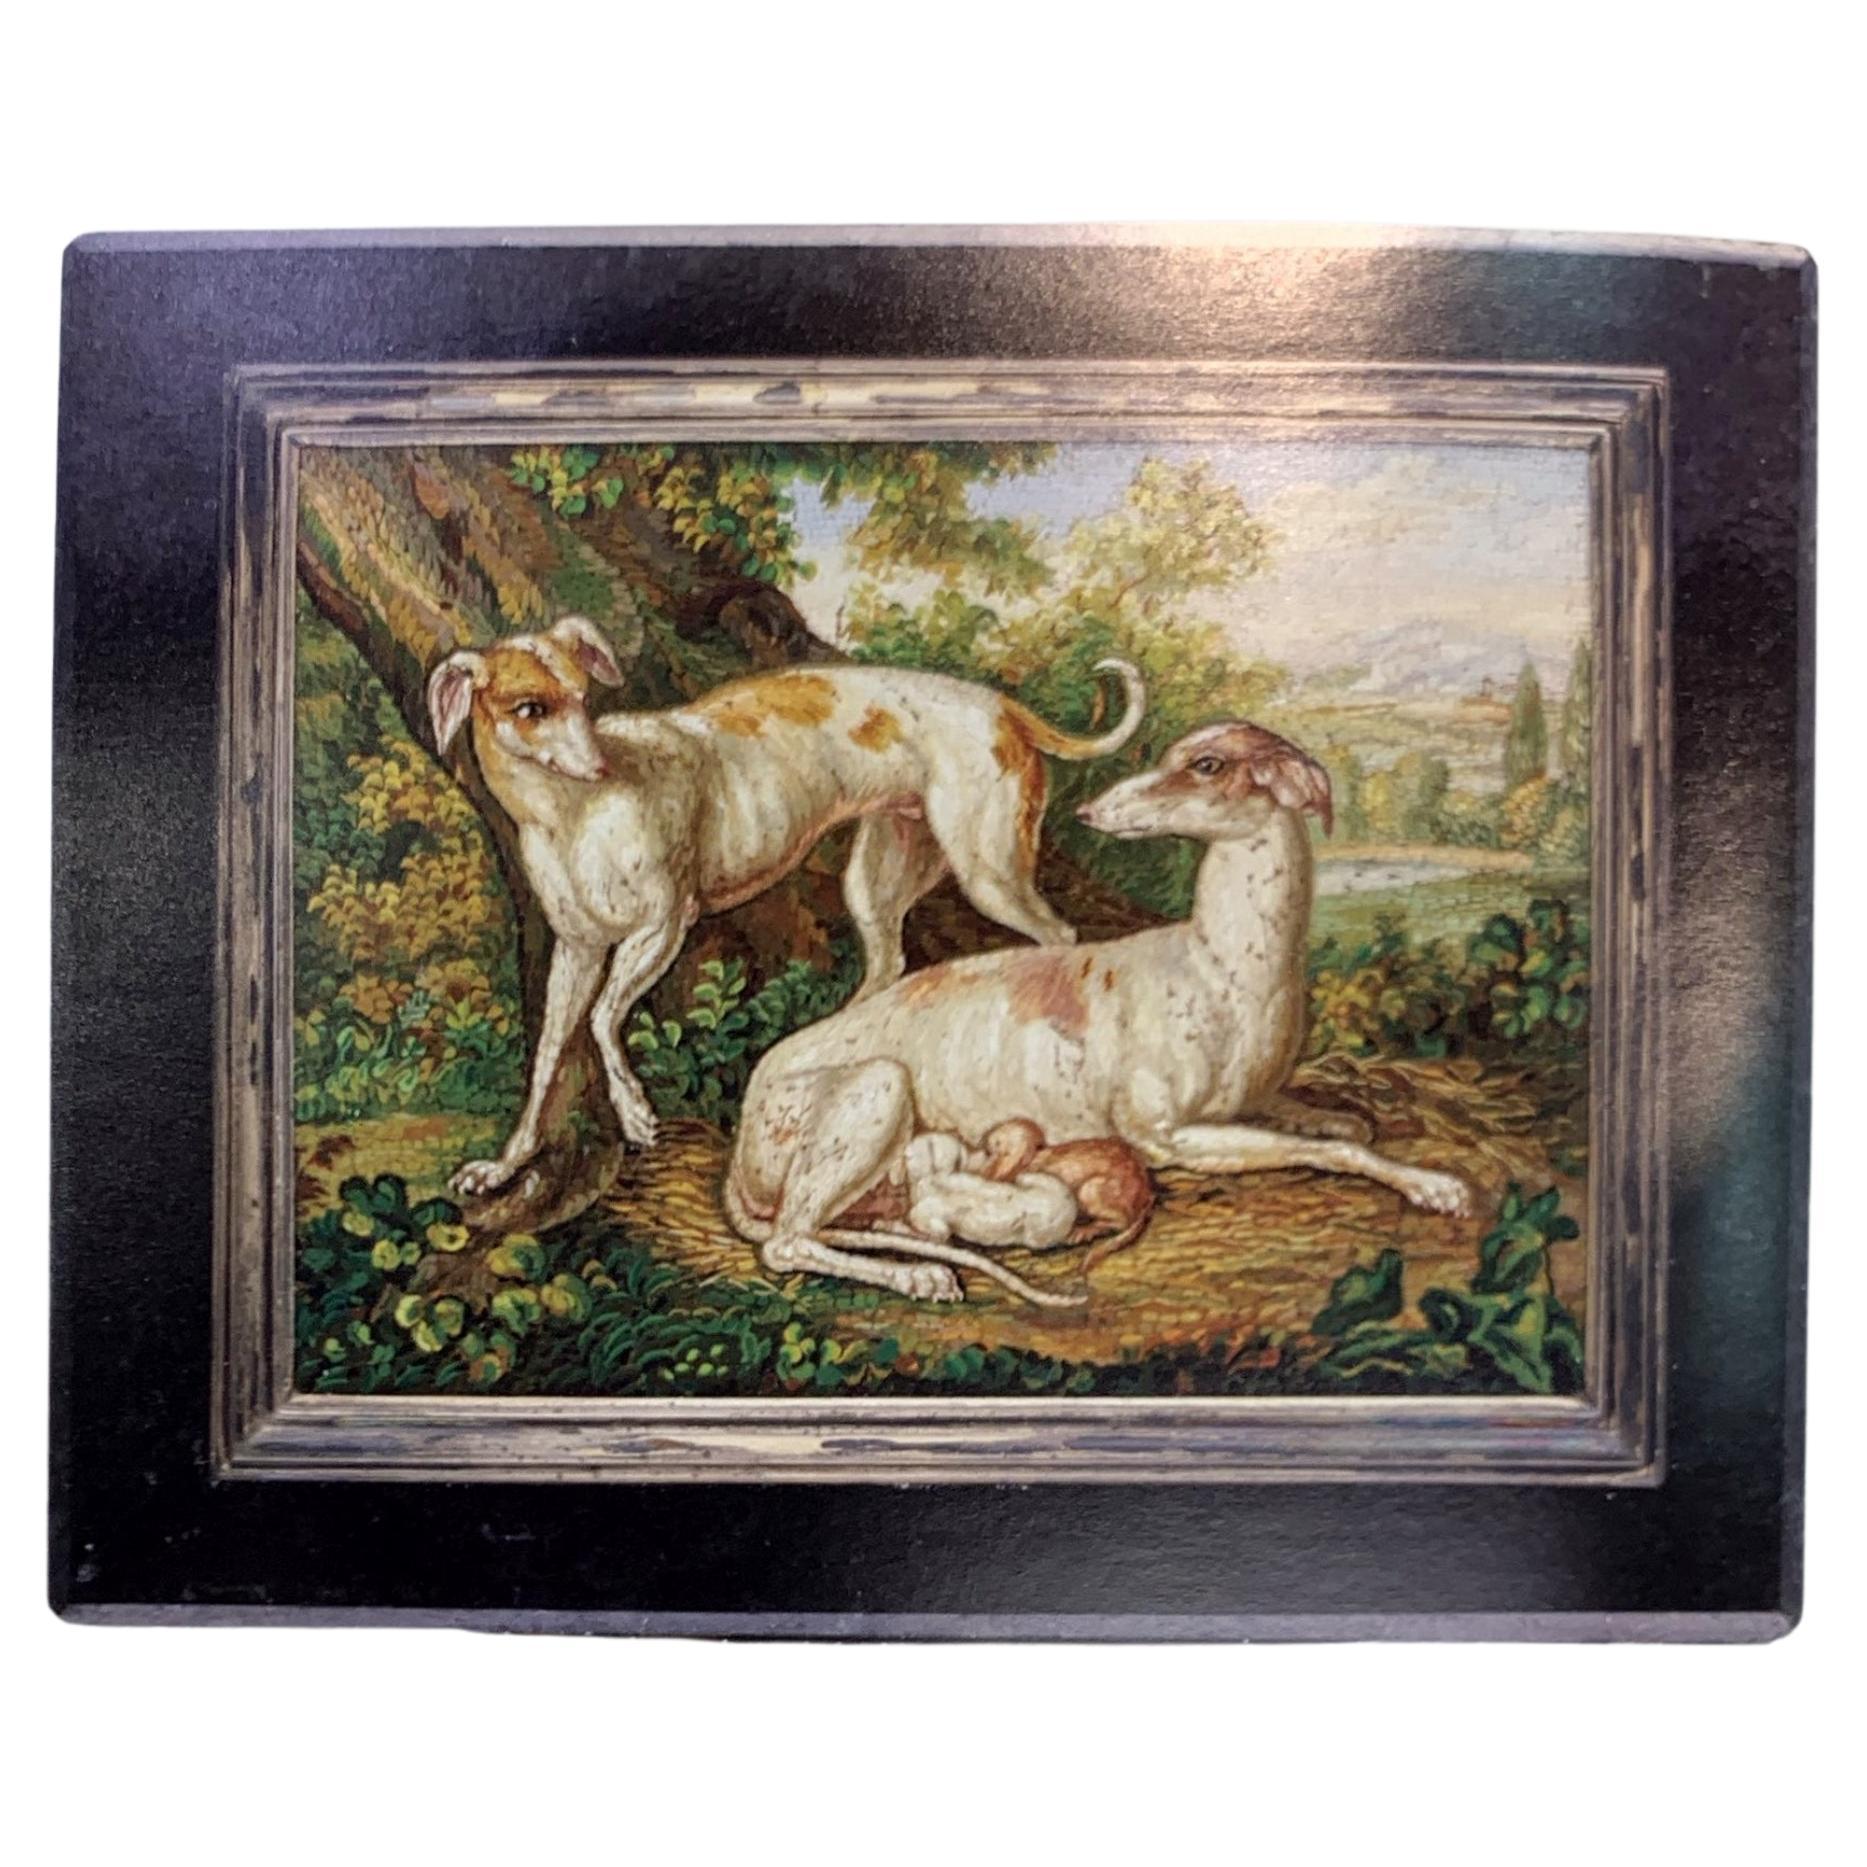 Greyhound Micro Mosaic Snuff Box

A variegated hardstone snuffbox with a silver gilt framed micro mosaic of a family of greyhounds set in the lid. The micro mosaic is attributed to the late 18th century early artist Giacchino Barberi.

Measurements: